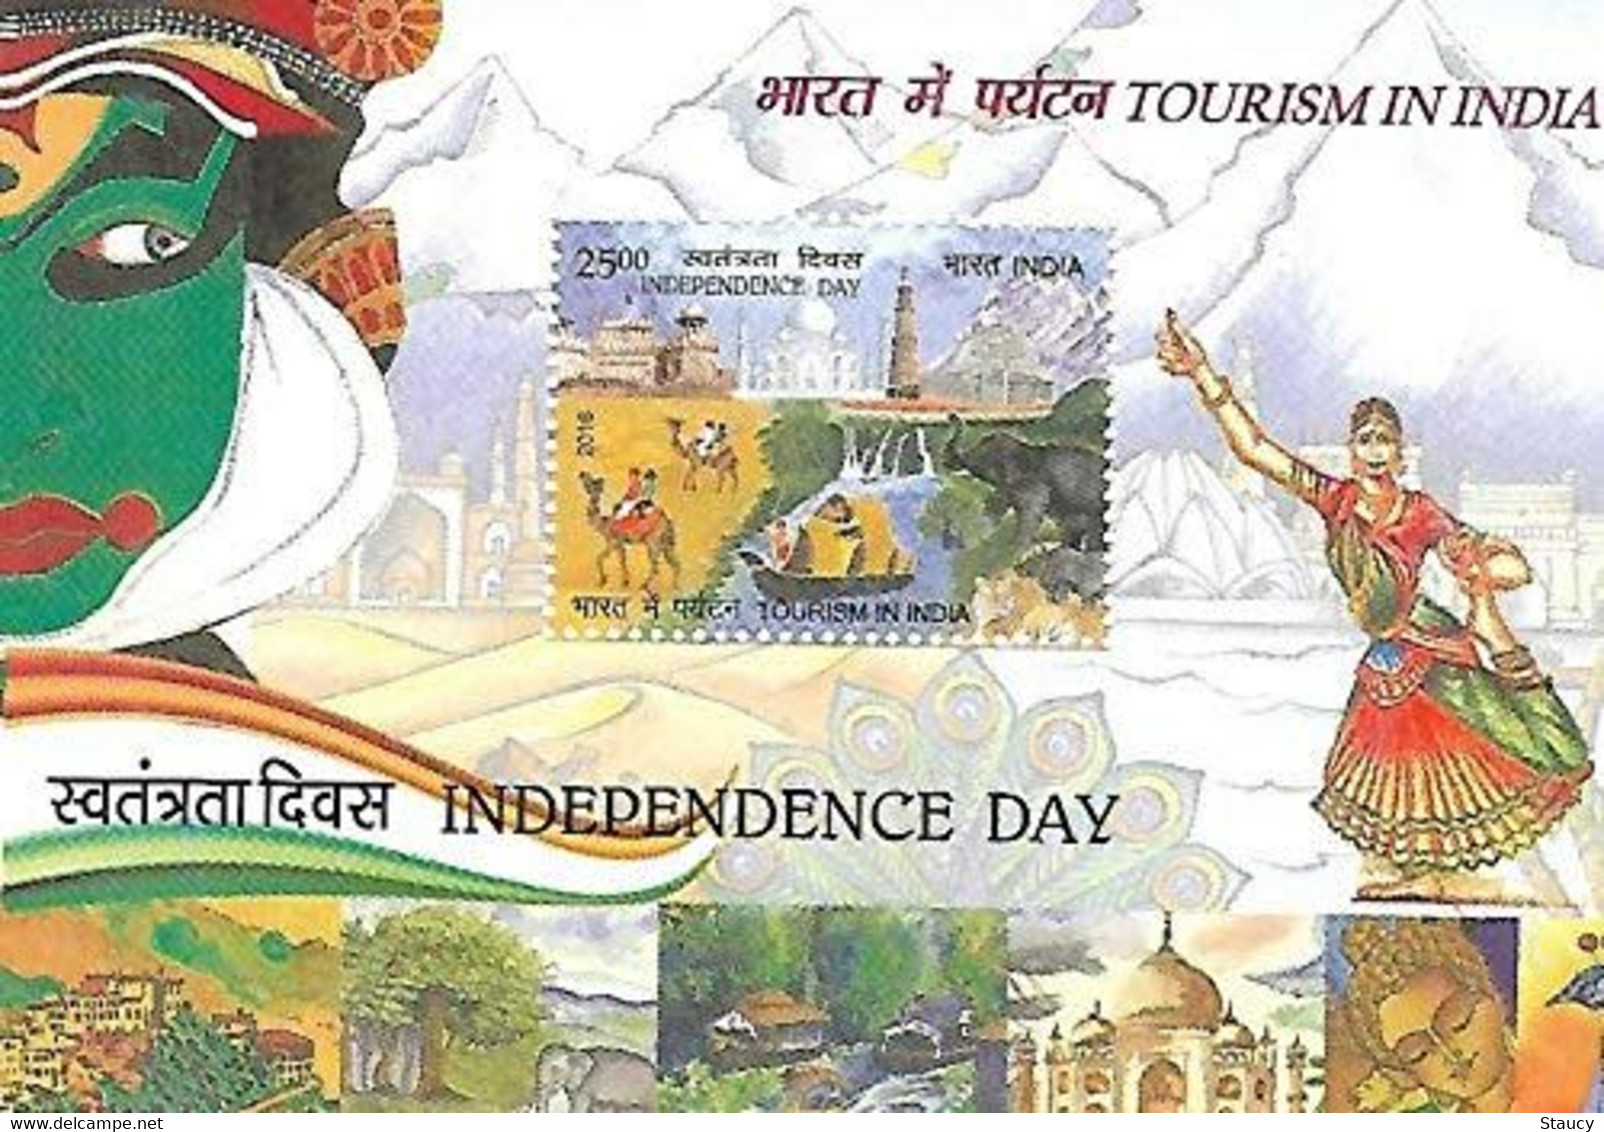 India 2016 INDEPENDENCE DAY, TOURISM IN INDIA MINIATURE SHEET MS MNH As Per Scan - Hinduism